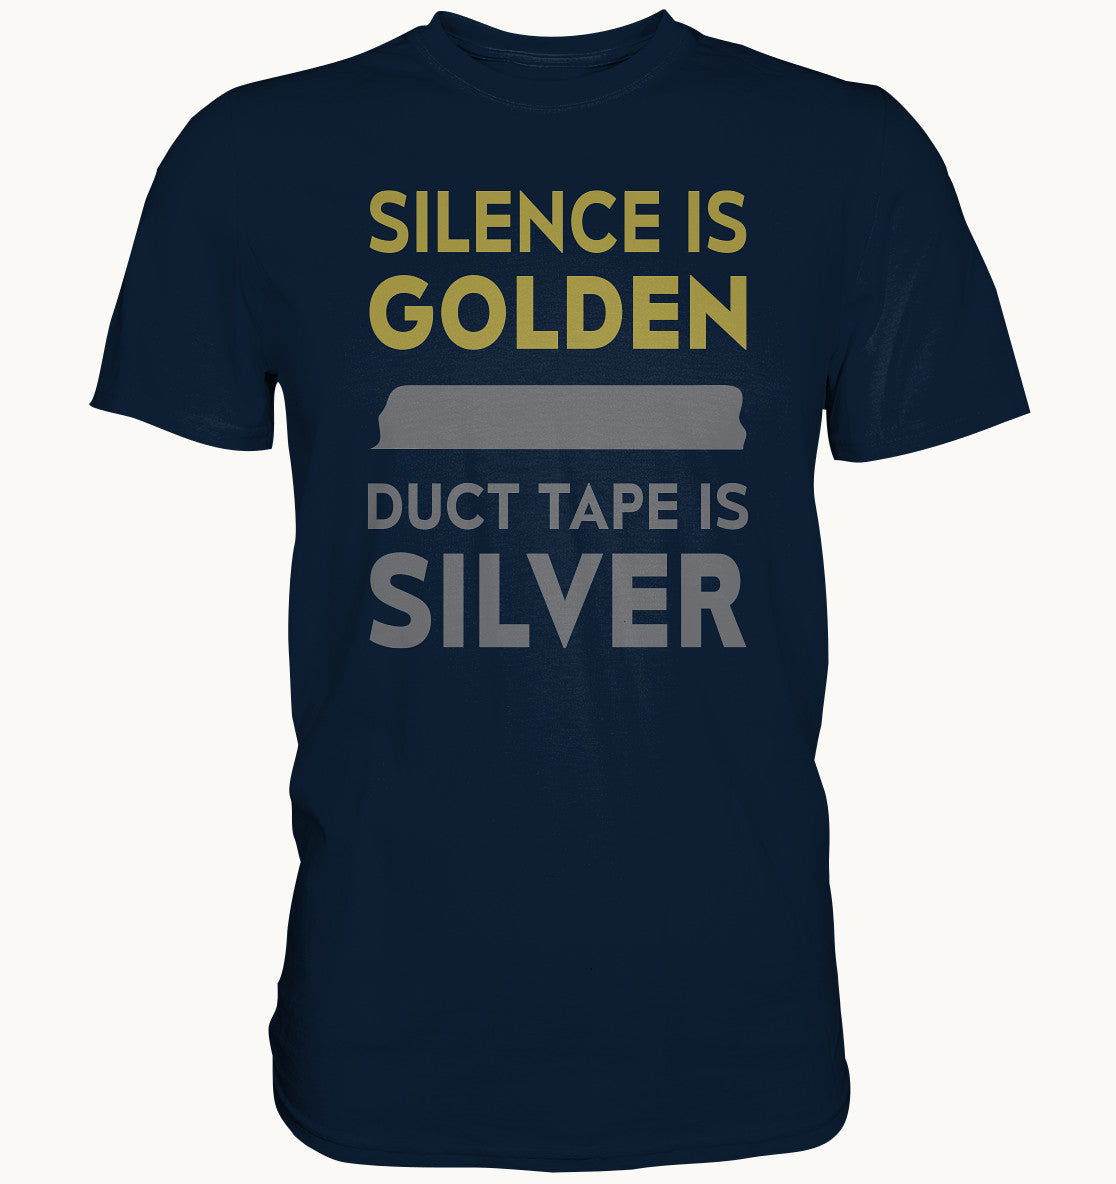 Silence is golden, duct tape is silver - Premium Shirt